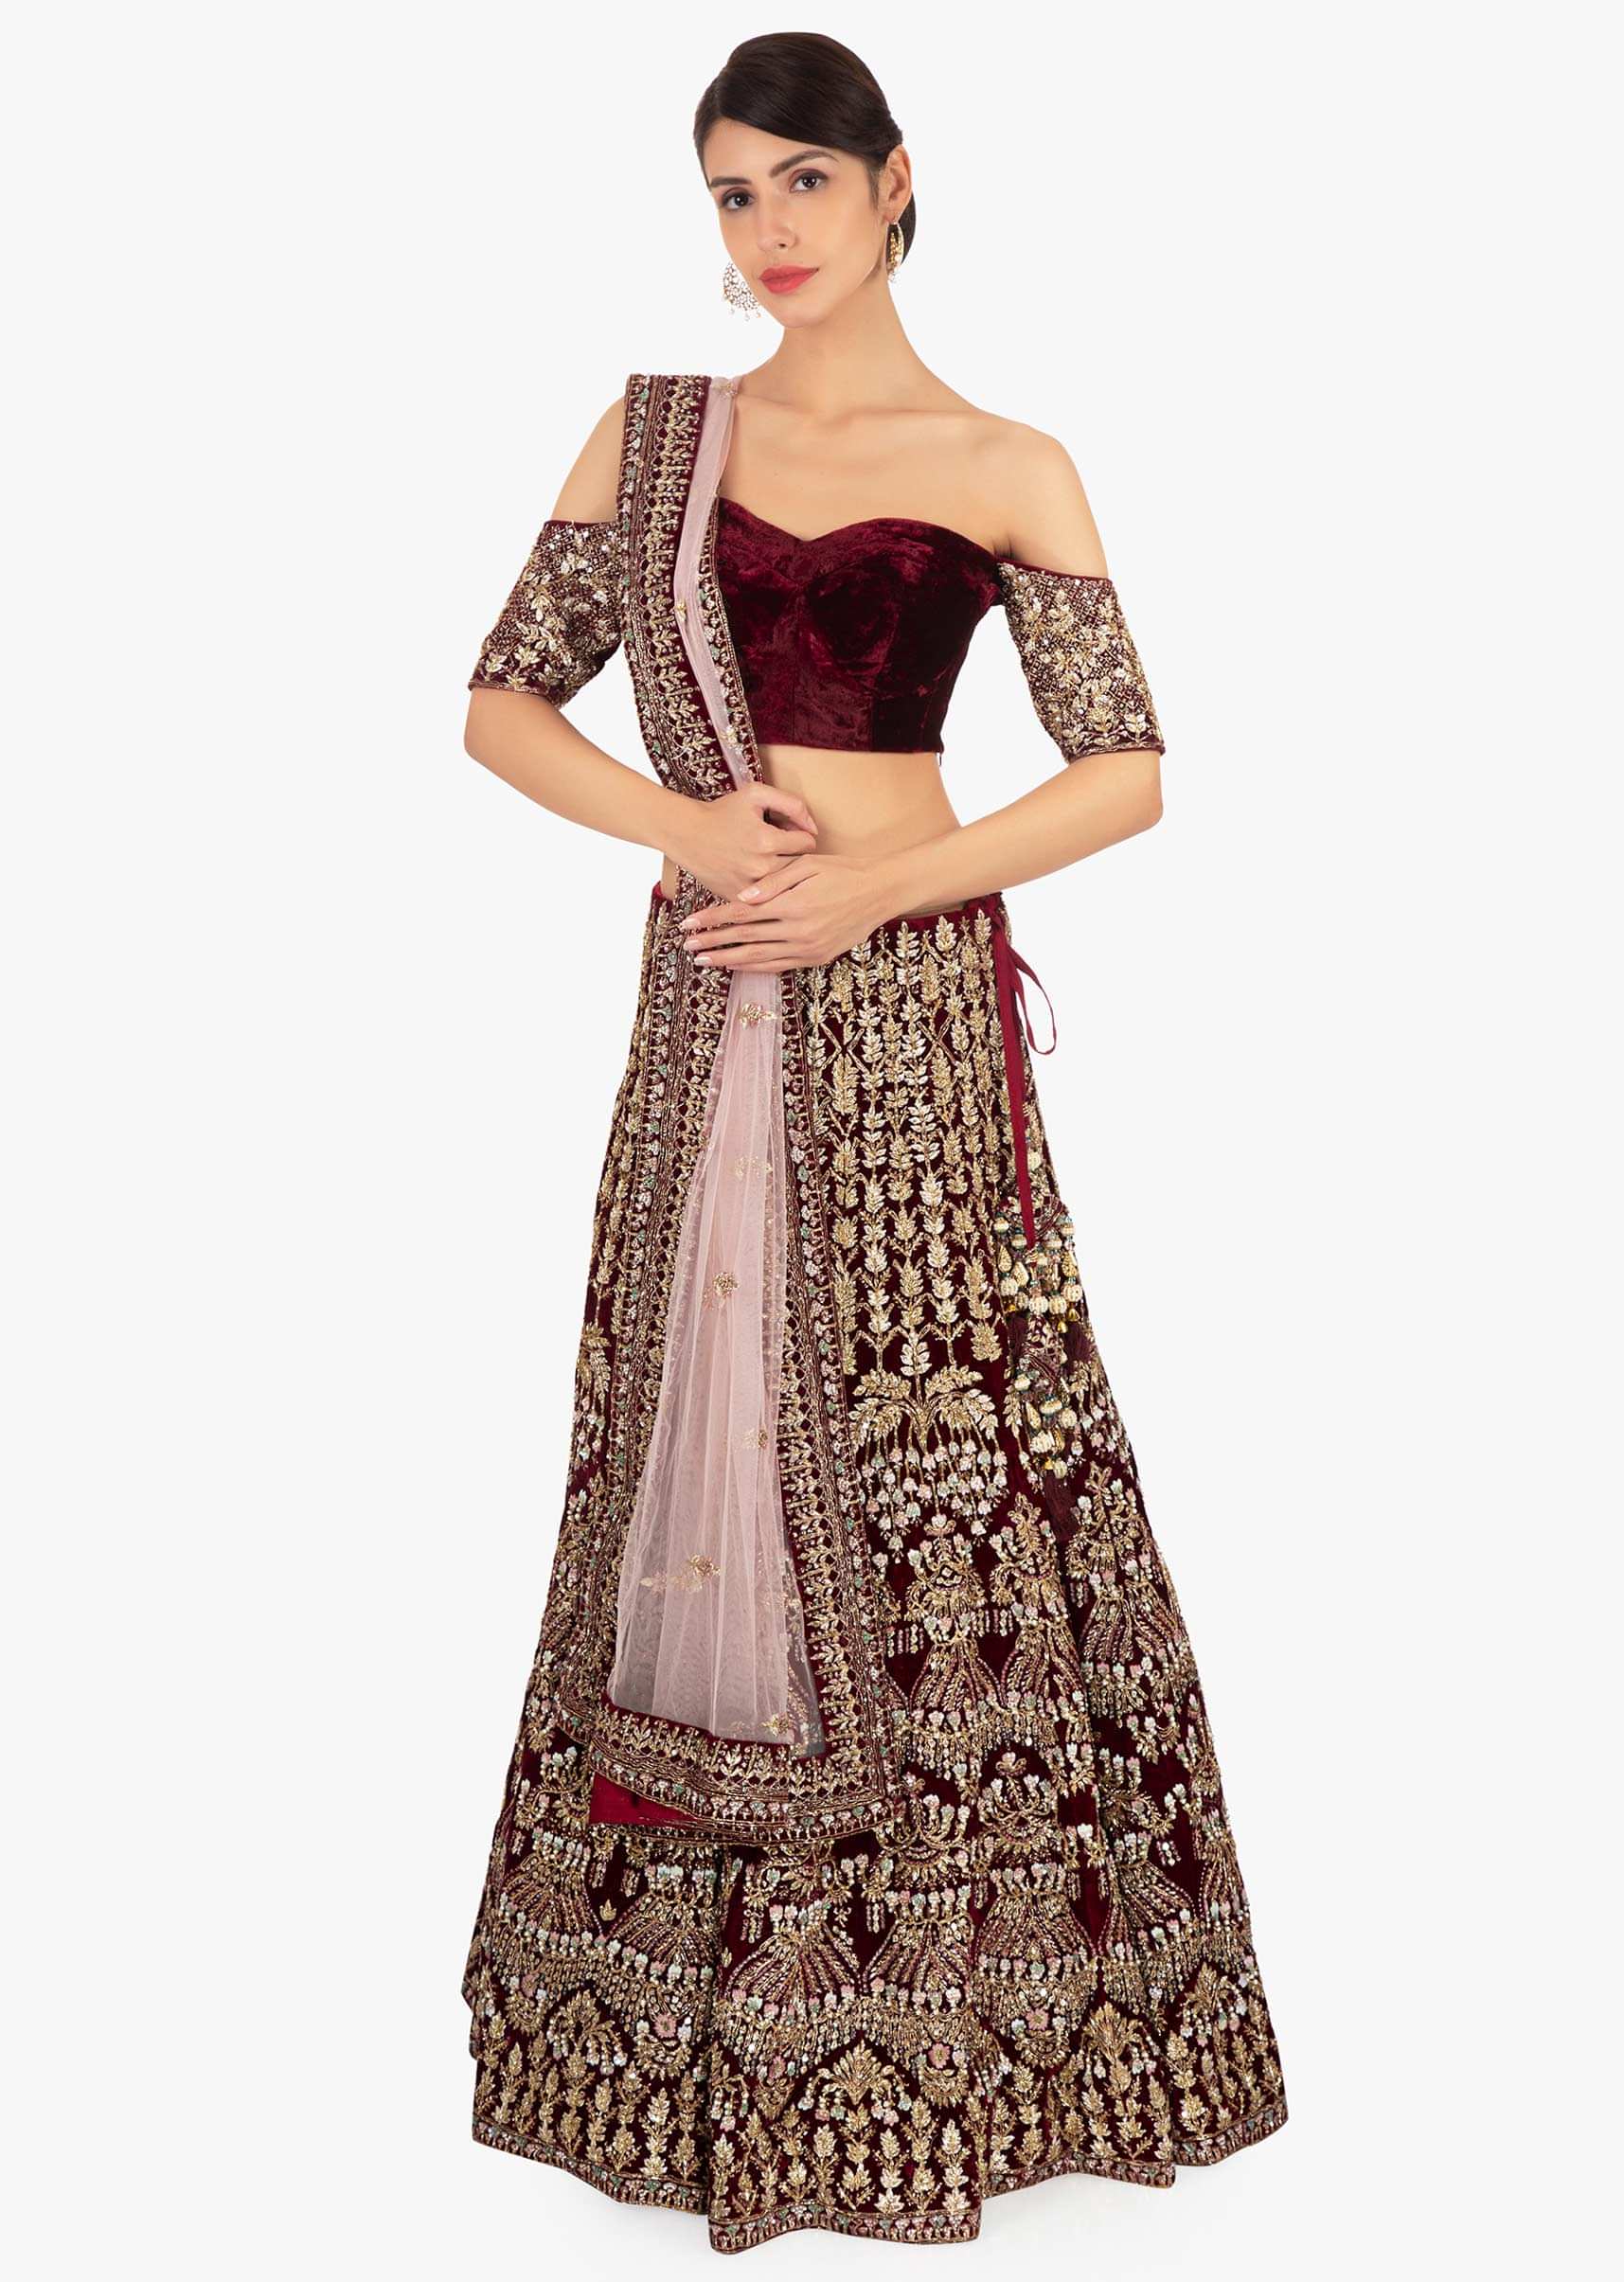 Maroon off shoulder blouse paired with embellished lehenga and pink net dupatta